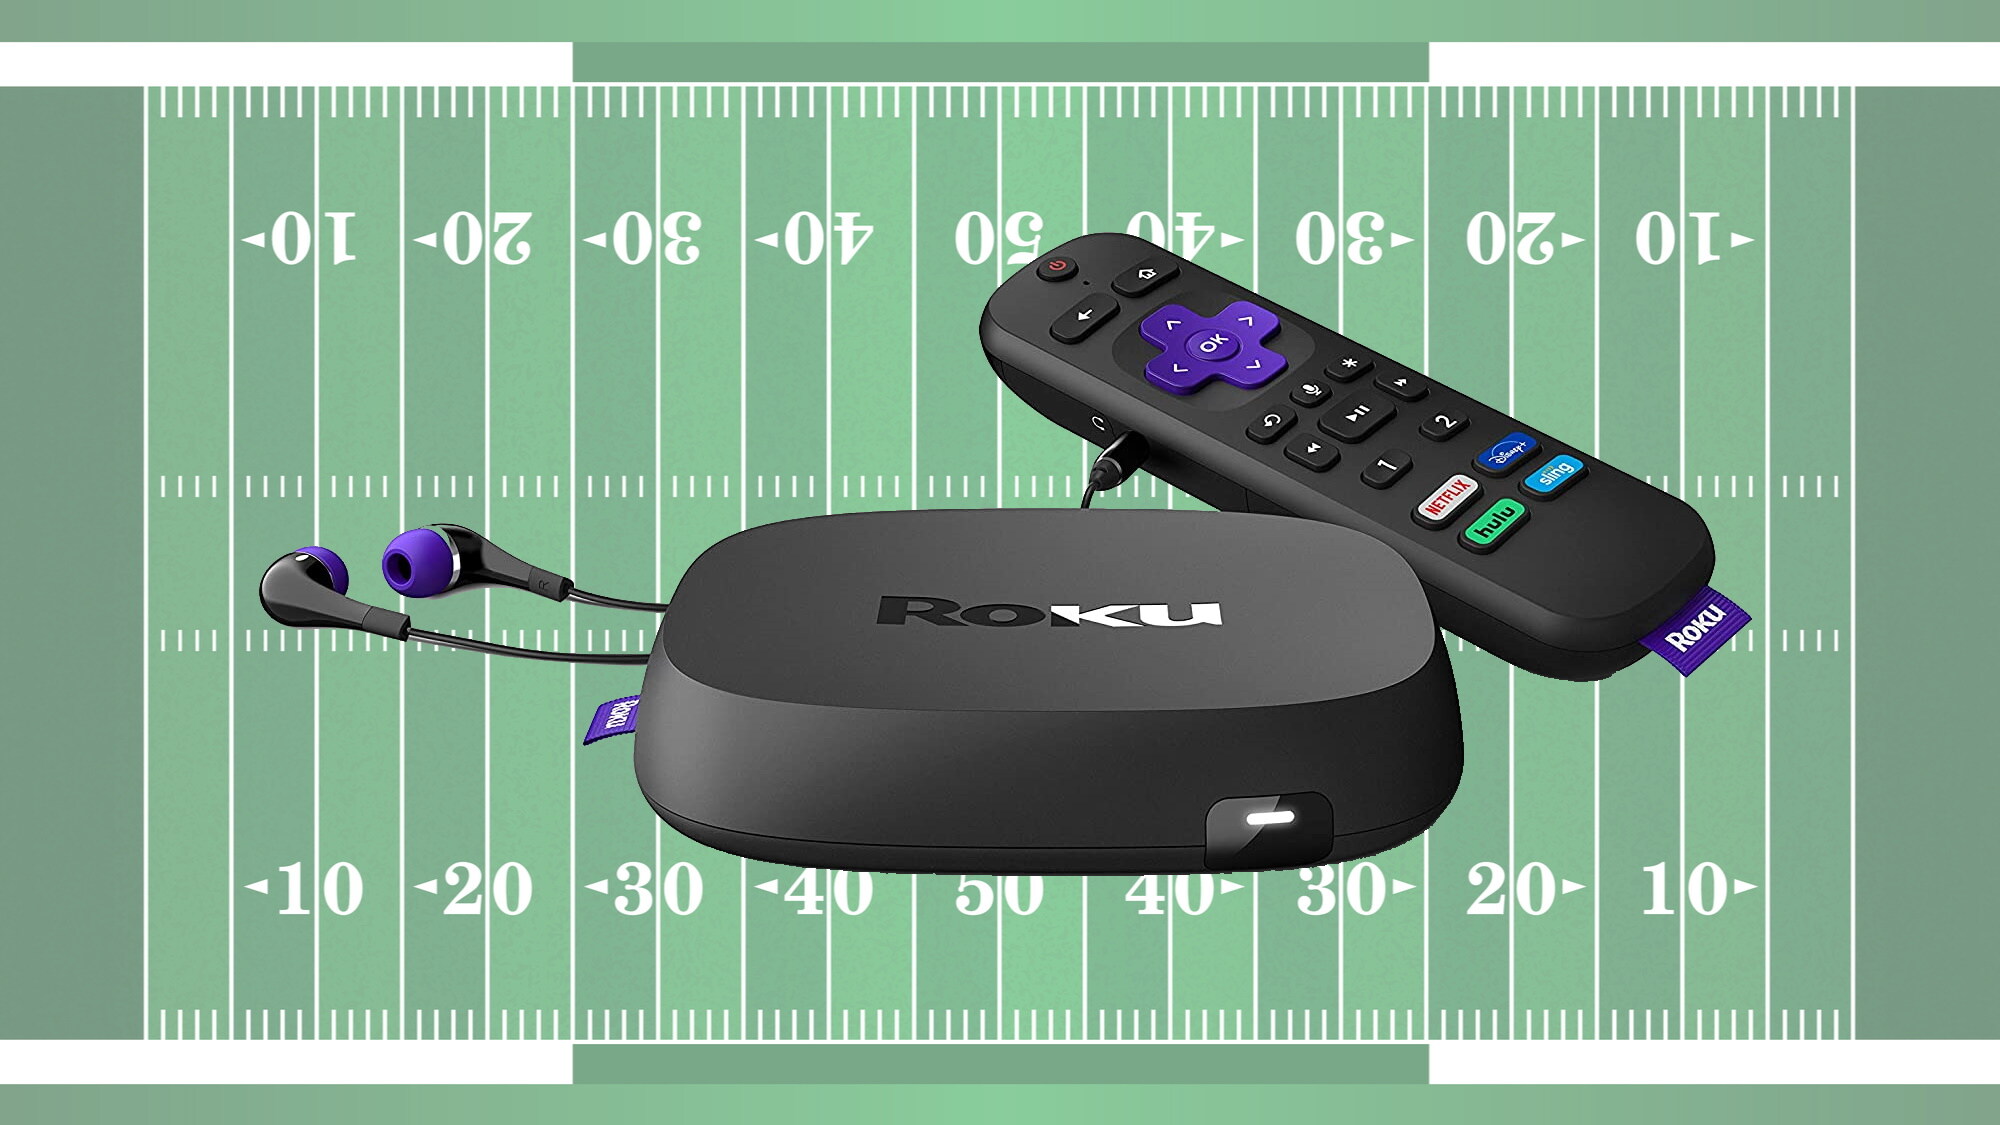 What Streaming Device Can I Watch The Super Bowl On